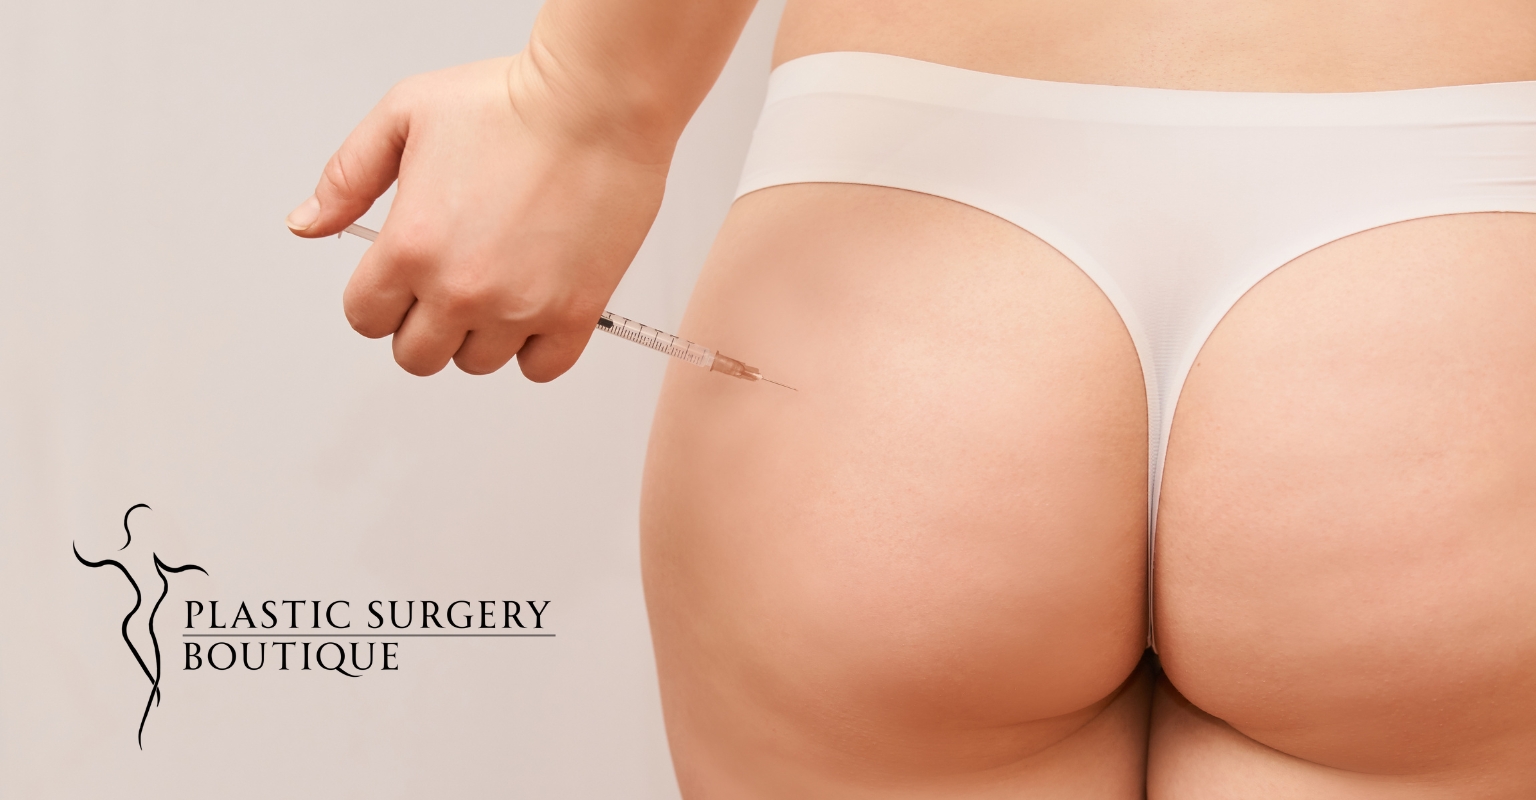 The Ugly Truth Behind Brazilian Butt Lifts: Why Choosing Safety Over Price is Essential